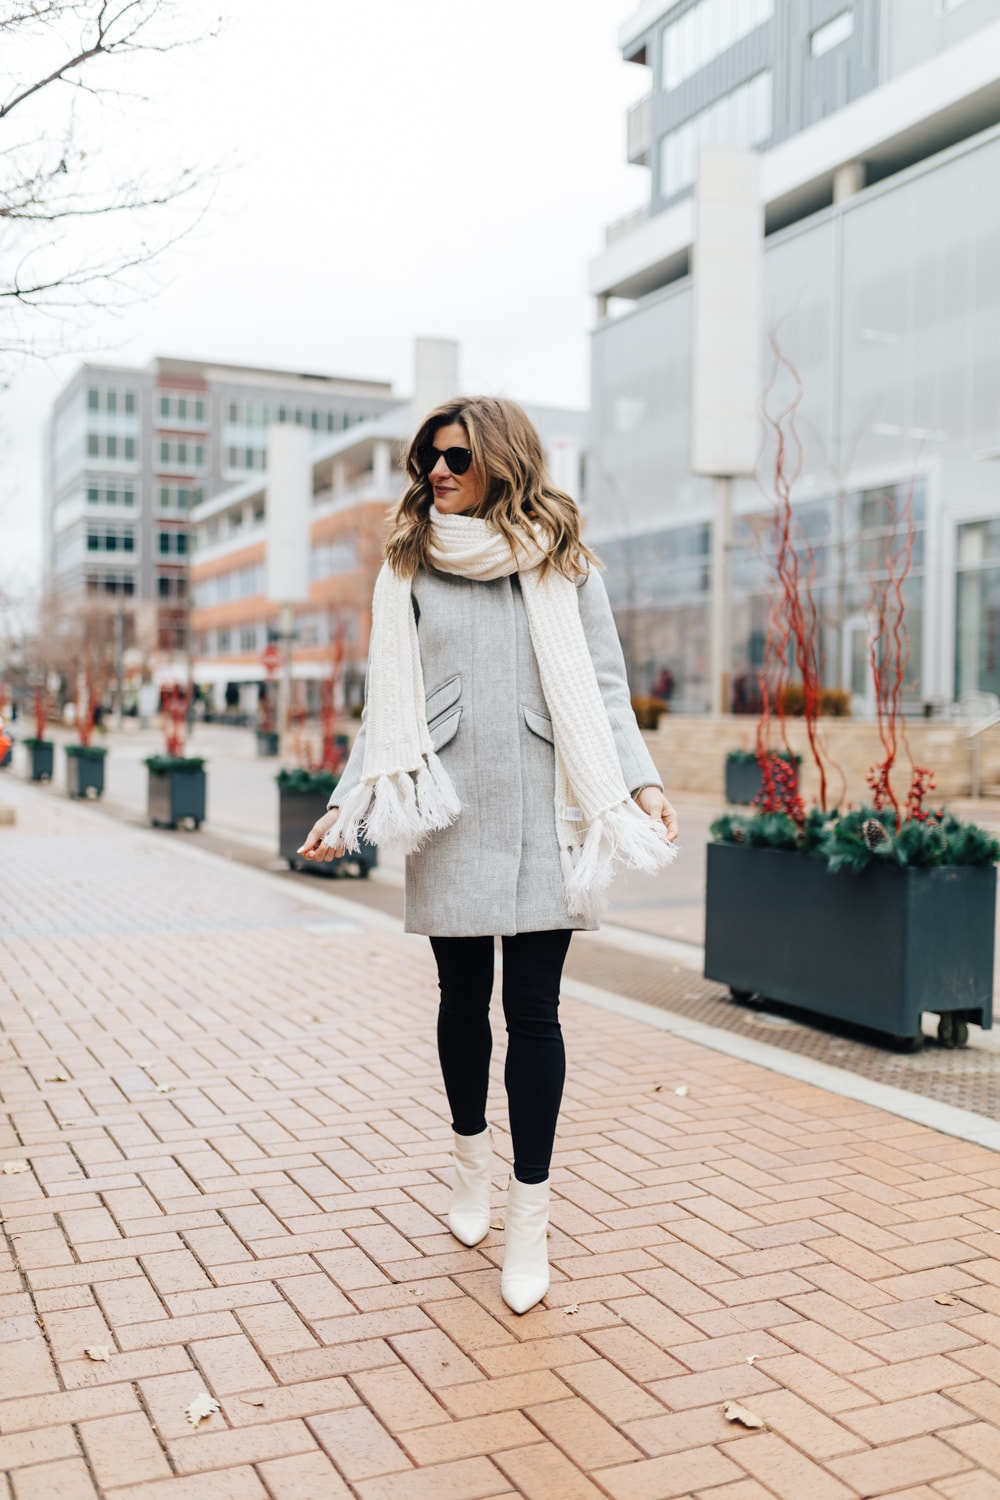 winter outfit idea grey coat, black jeans, white booties cozy scarf